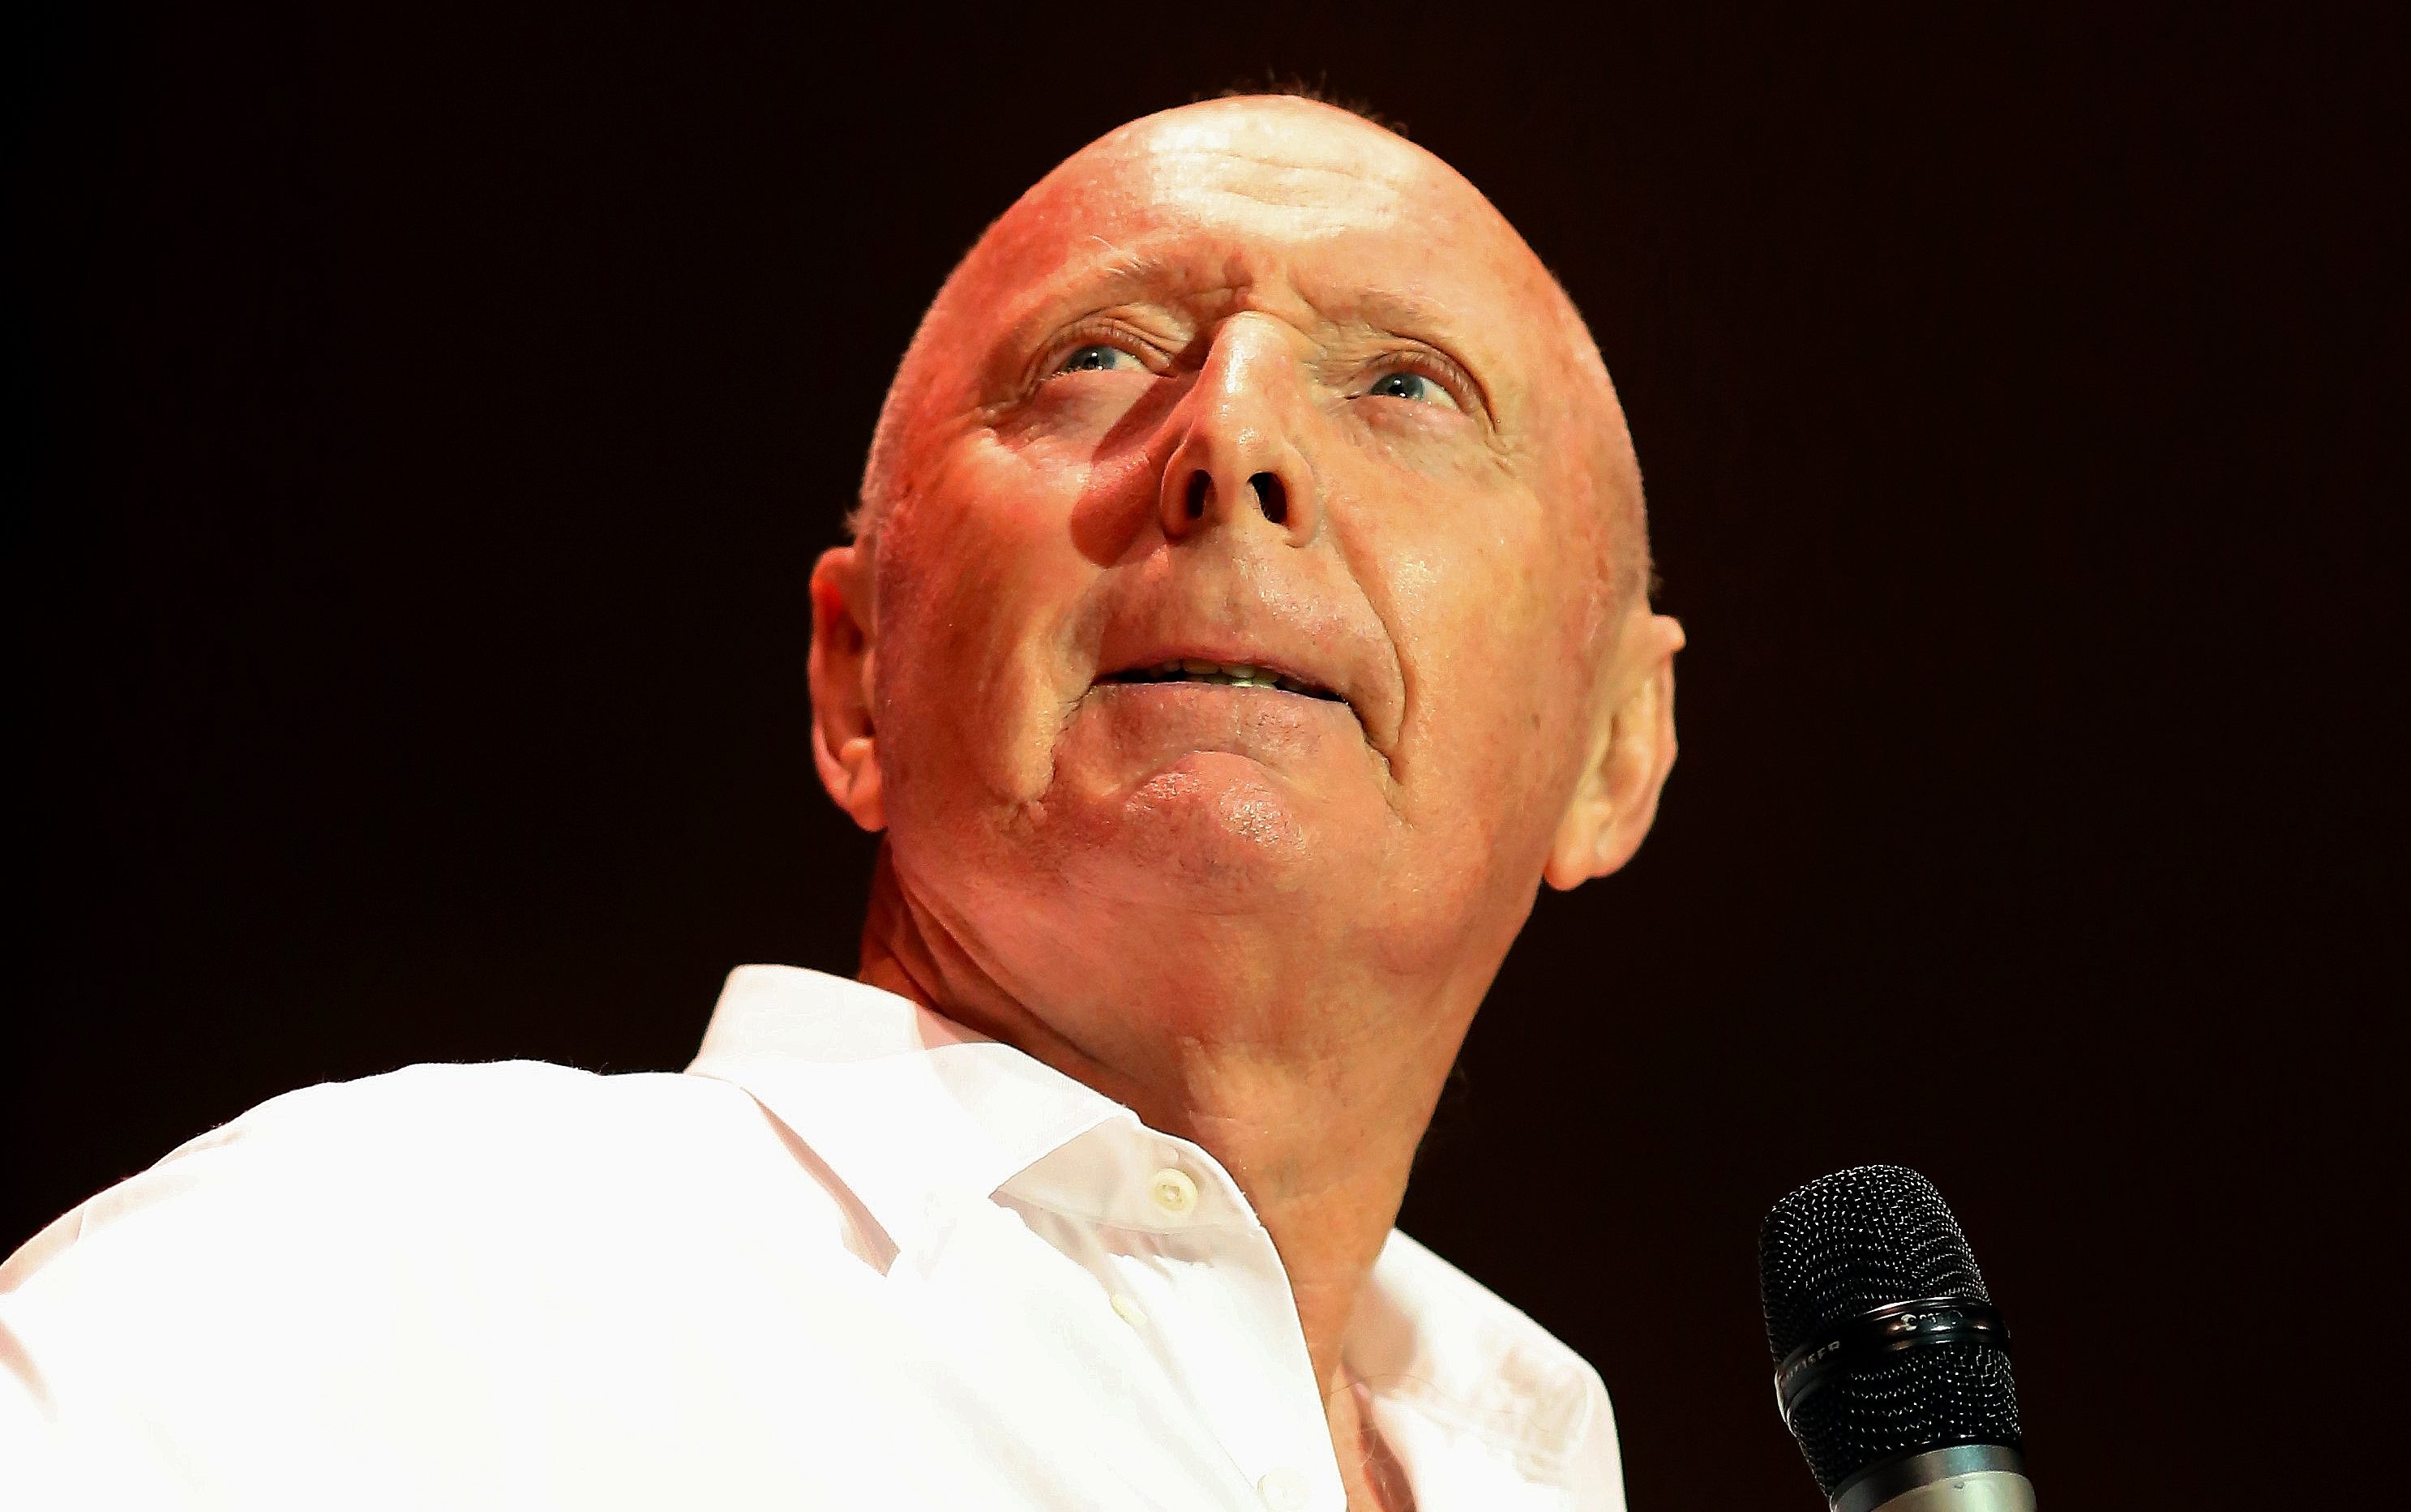 Jasper Carrot says he is enjoying his stand-up again after a break, despite recently celebrating his 74th birthday